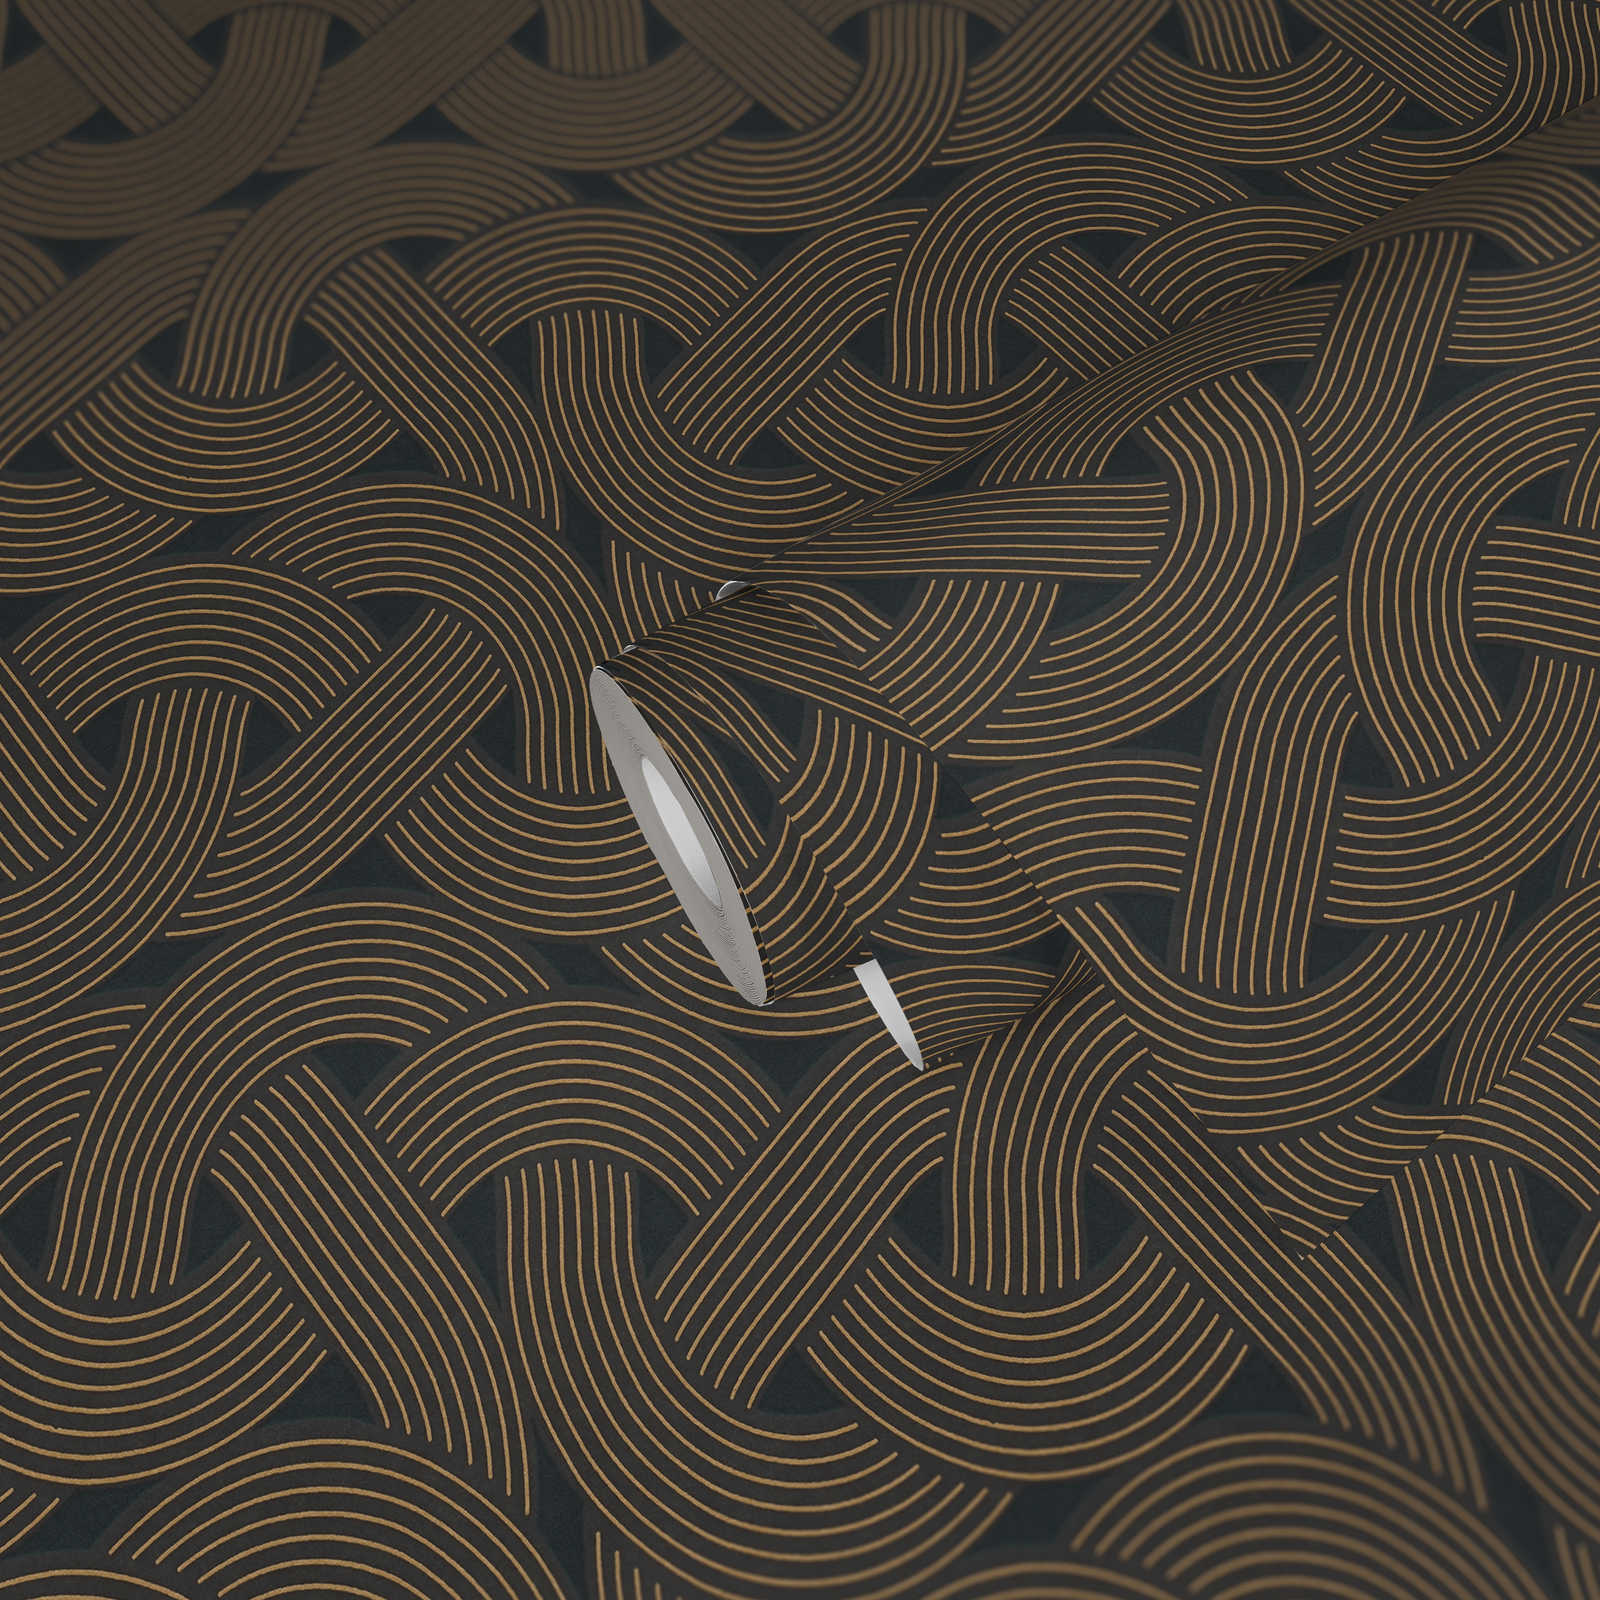             Non-woven wallpaper with line pattern in art deco style - black, gold
        